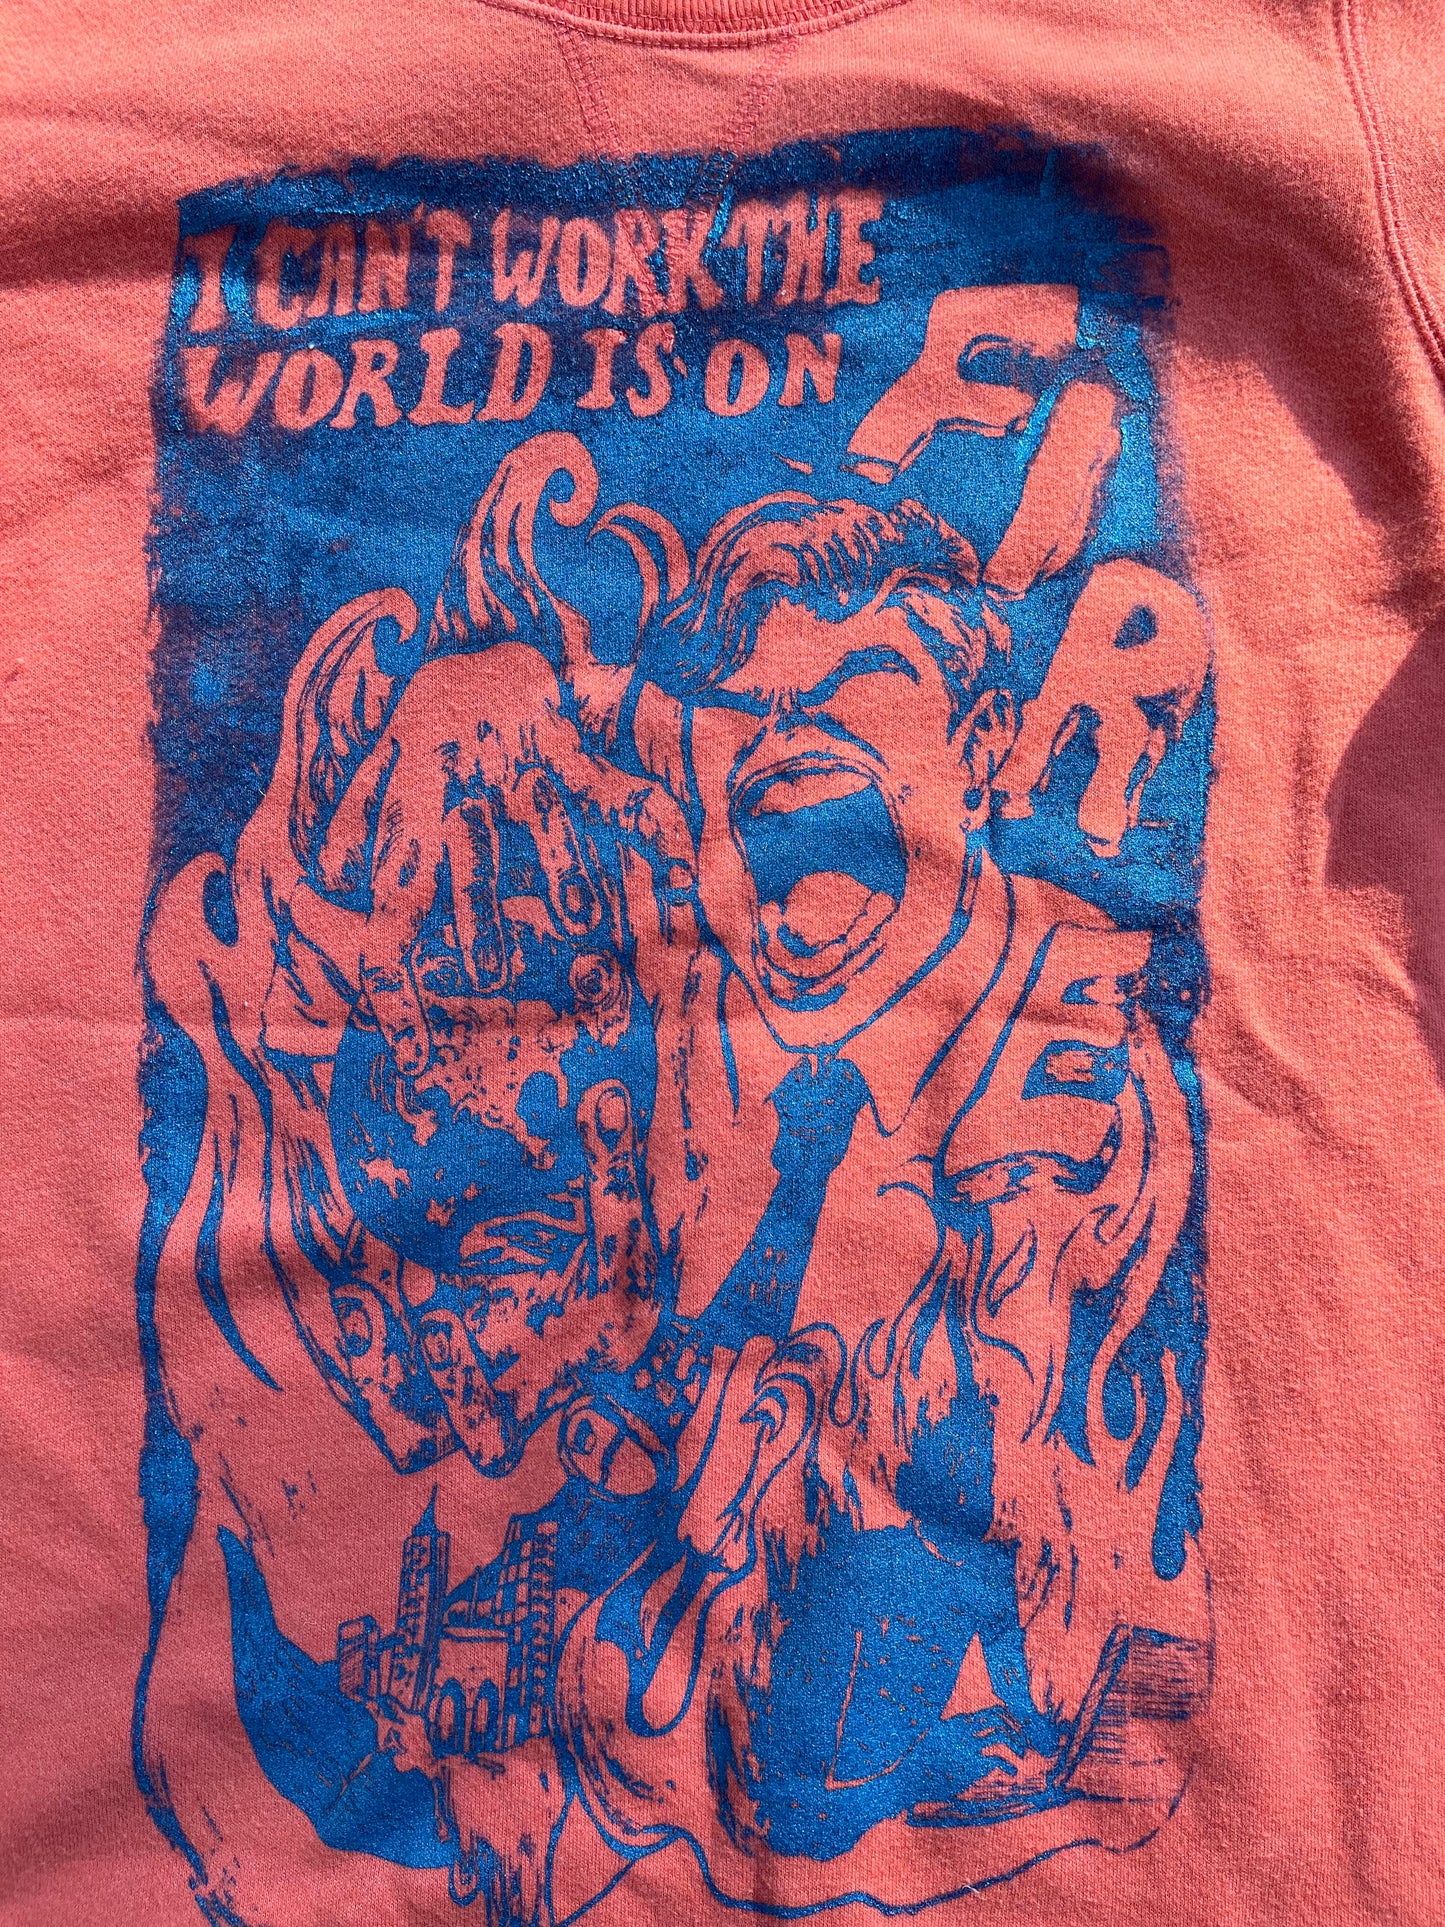 SMALL I Can't Work the World is on Fire orange sweater graphic tee 04